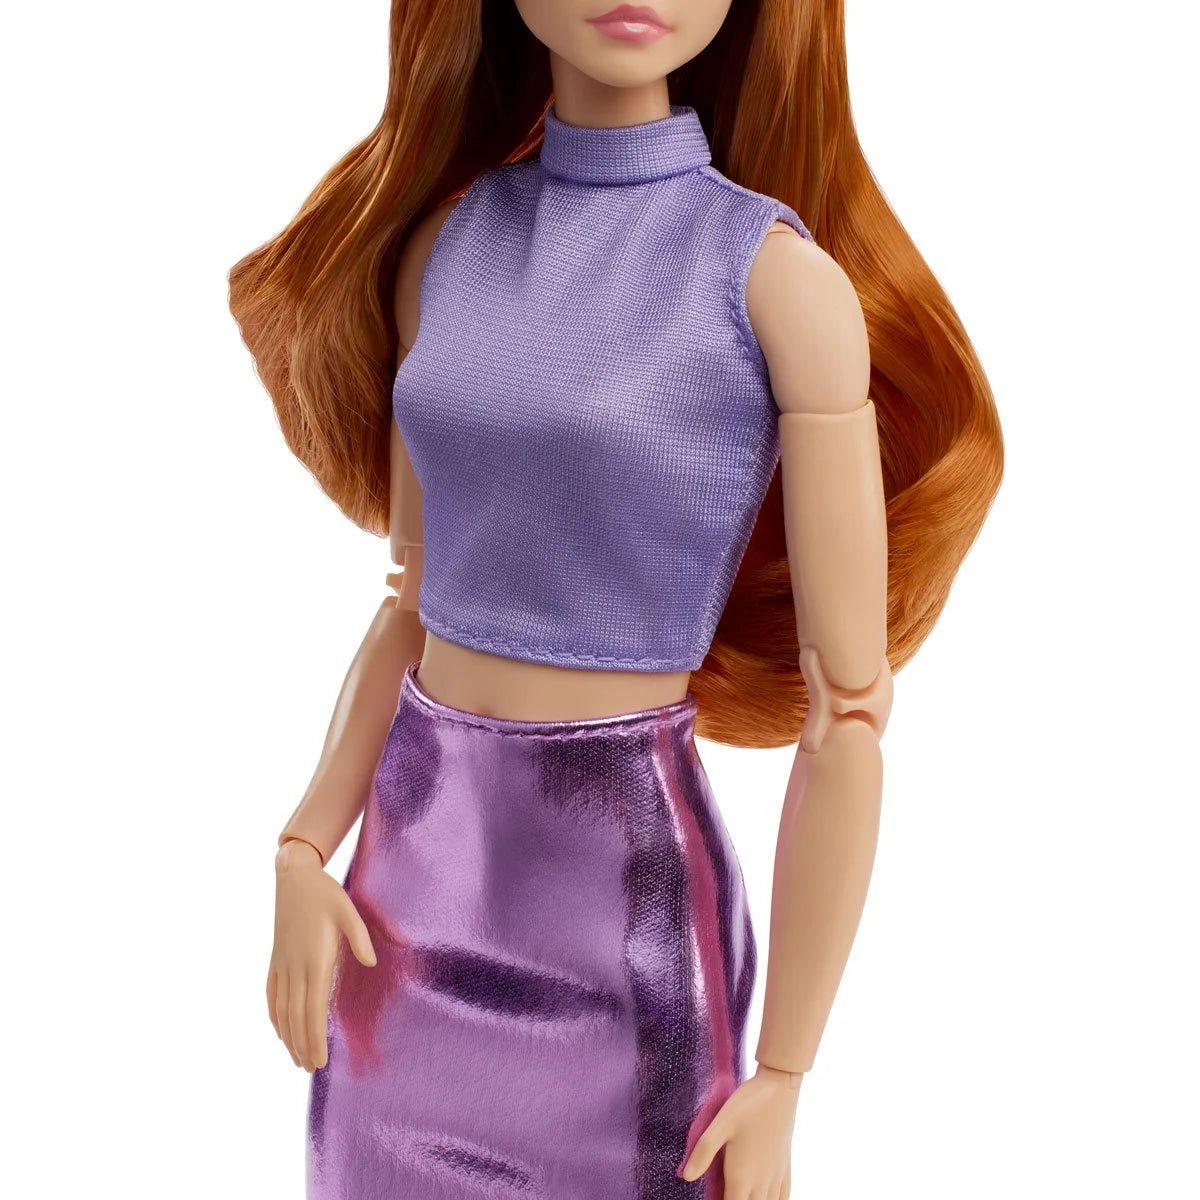 Barbie Signature Barbie Looks Doll #20 (Original, Long Red Hair) - Simon's Collectibles